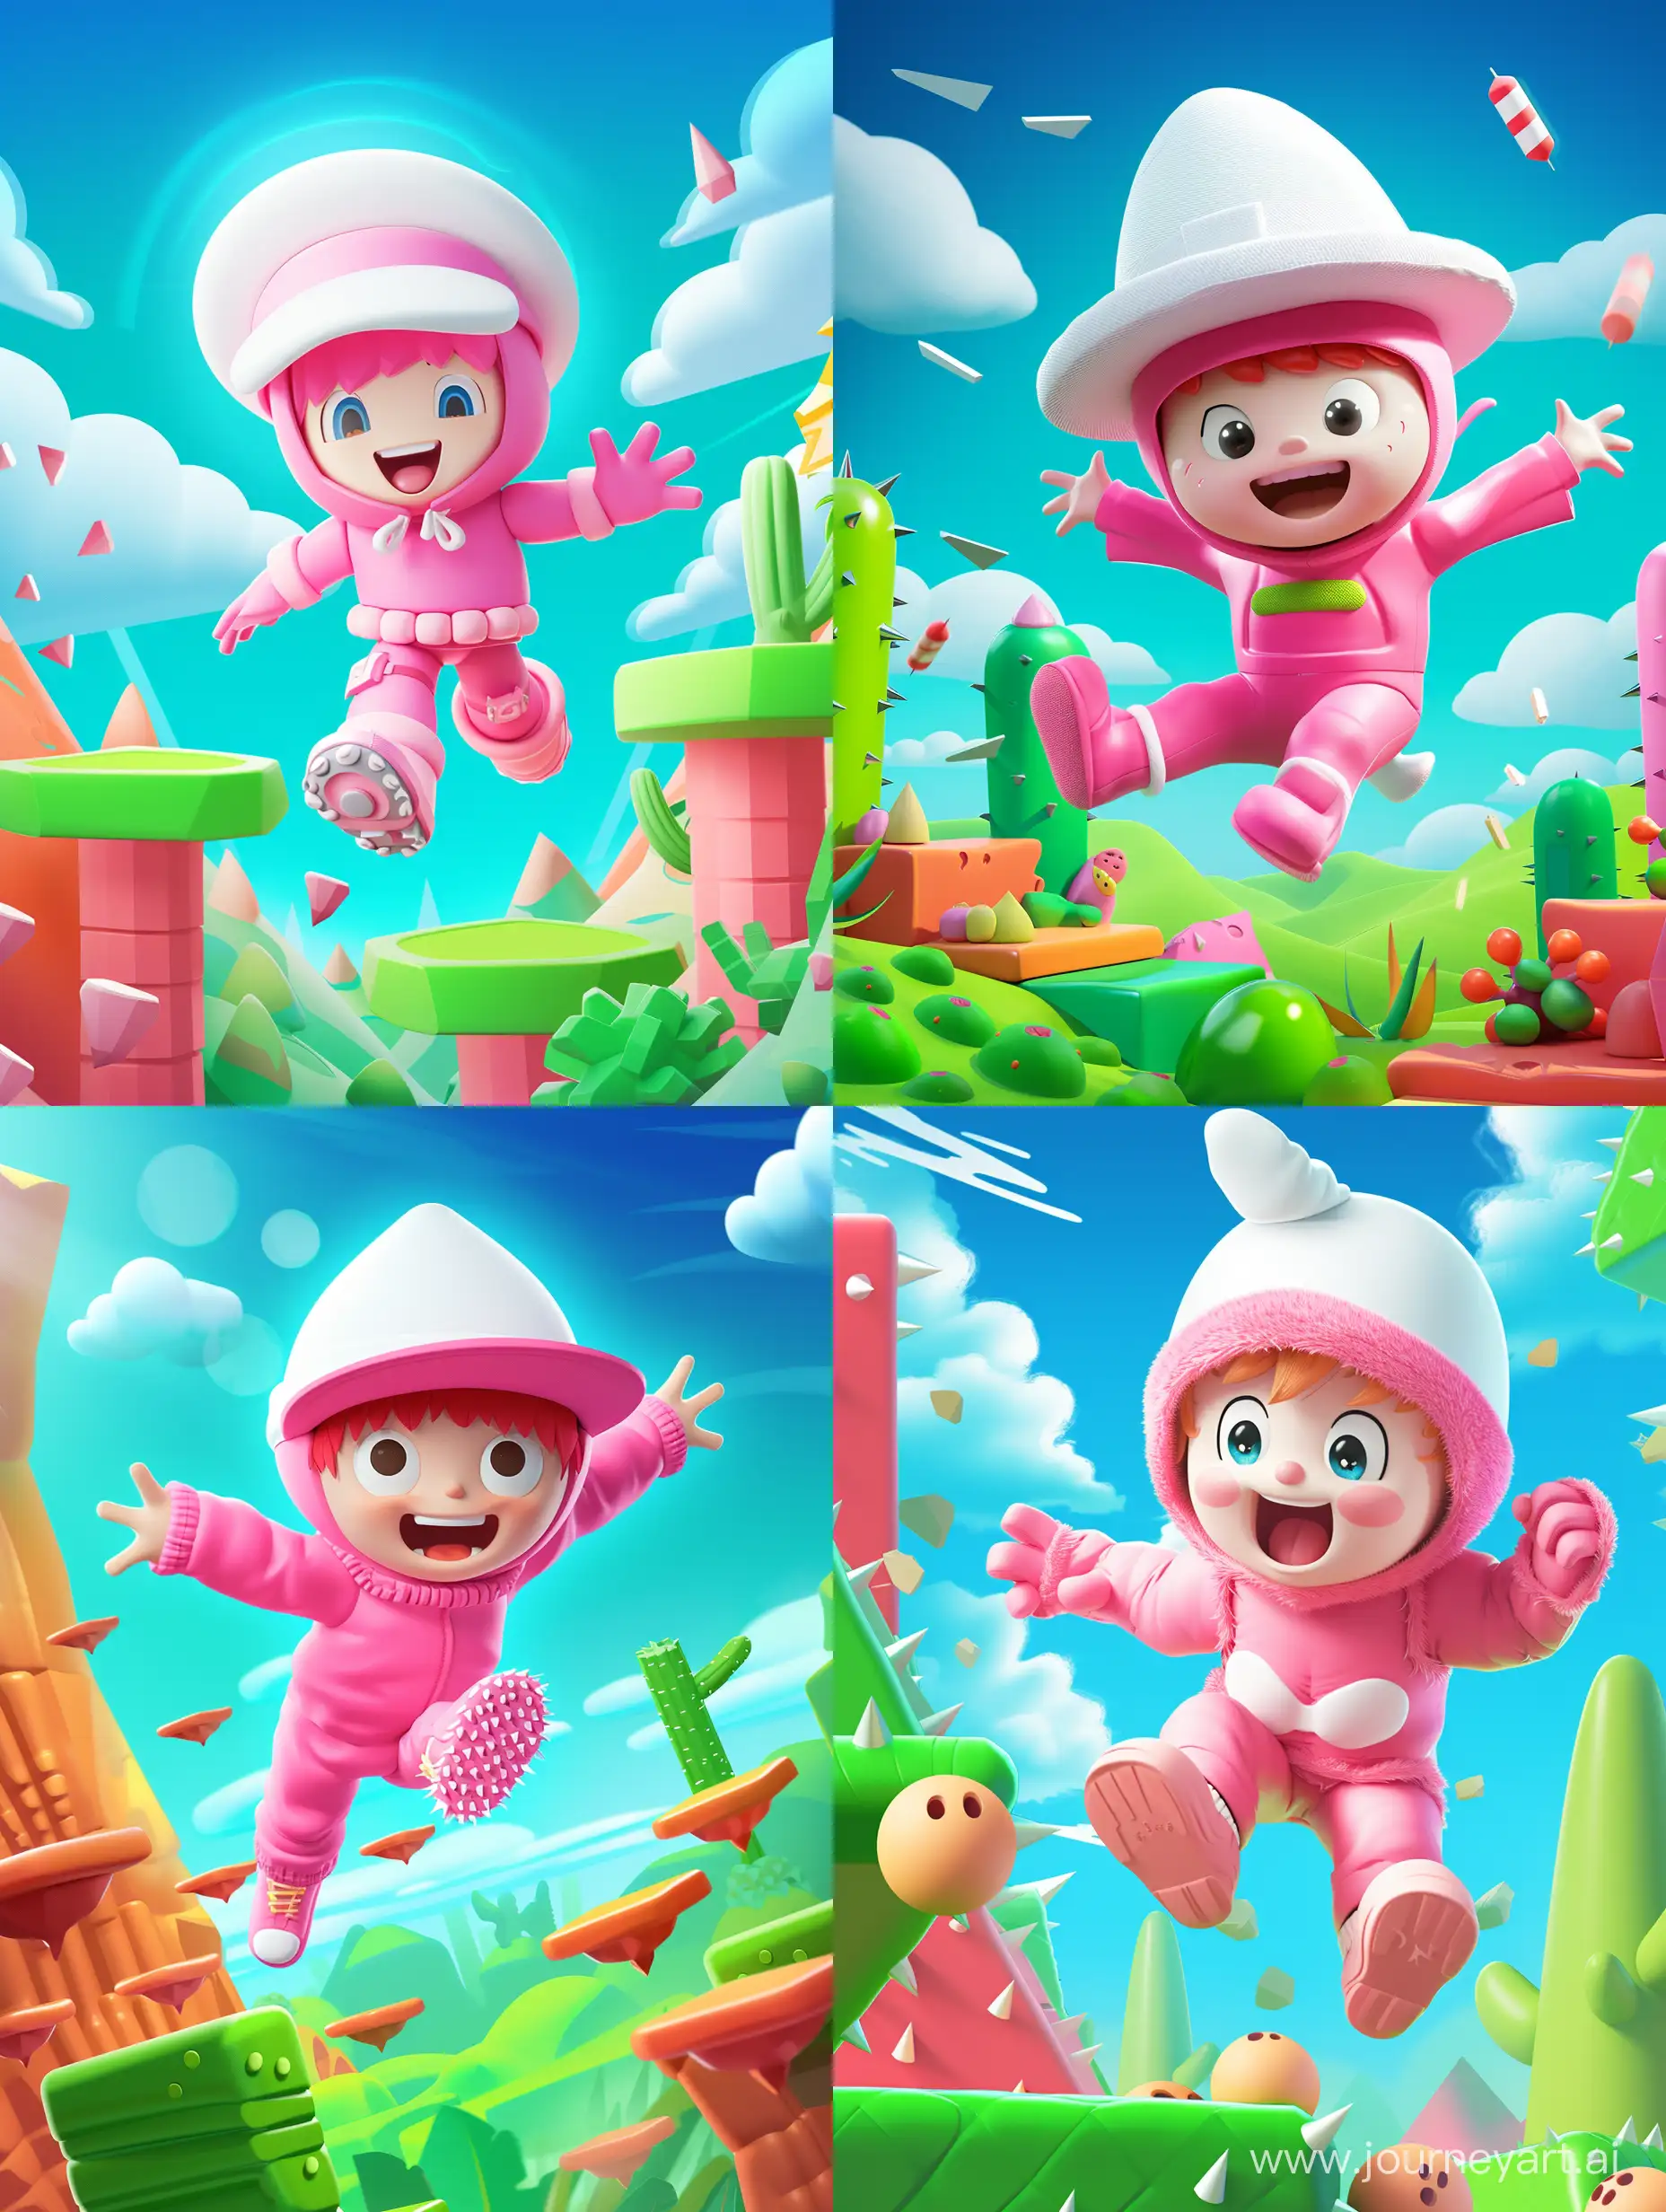 Playful-Pink-Character-Overcoming-Obstacles-on-Vibrant-Green-Platforms